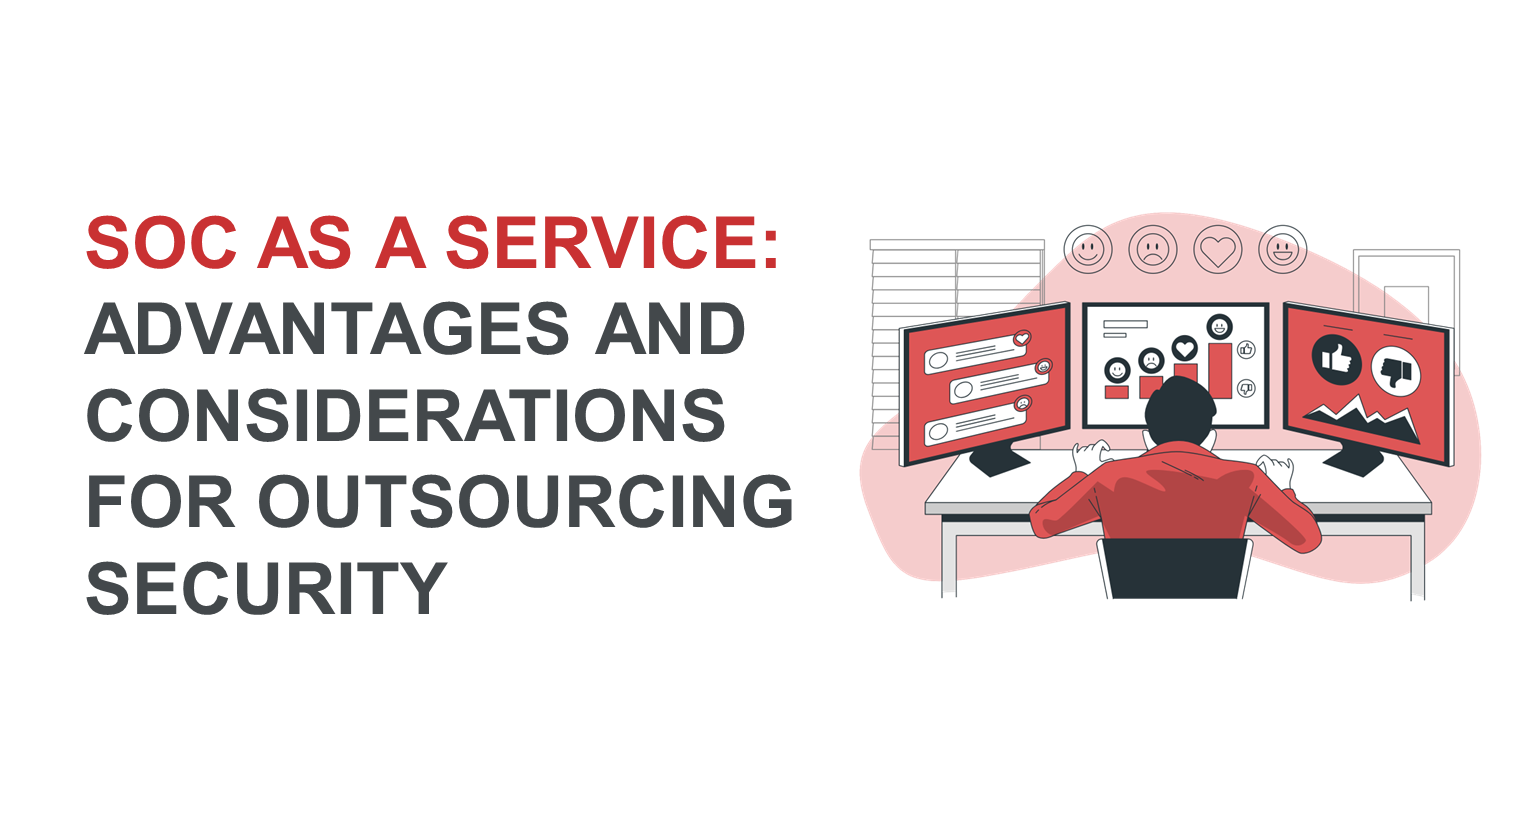 SOC as a Service: Advantages and Considerations for Outsourcing Security